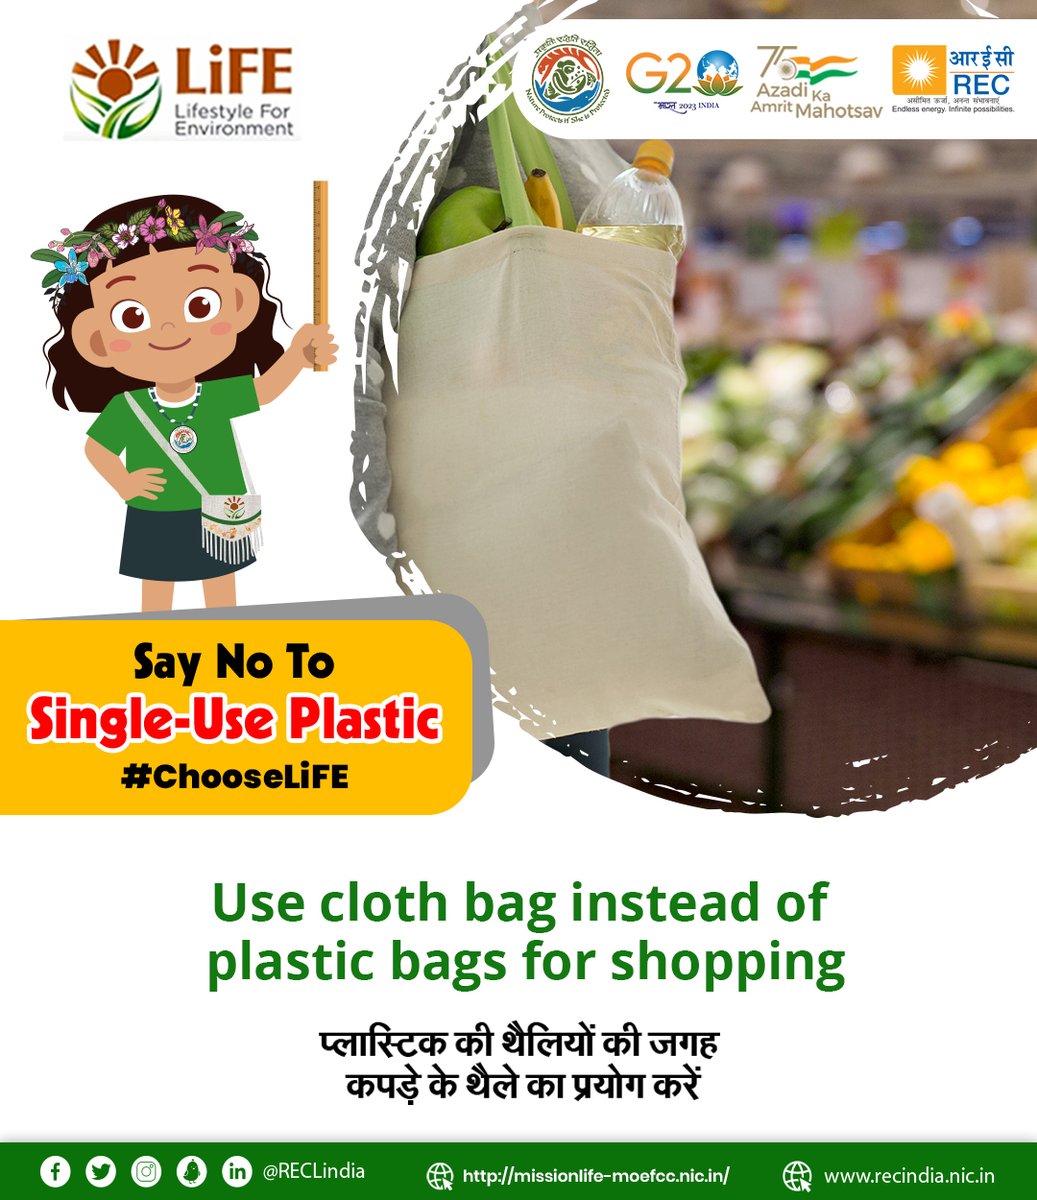 A sustainable lifestyle is a healthy lifestyle that refrains from polluting the planet with #singleuseplastic bags.

#ChooseLiFE #MissionLiFE #ClimateAction4LiFE #JanBhagidari

#RECLimited #REC #RECLindia #SustainableConsumption #GreenEnergy #PowerSector #CSRinitiatives…